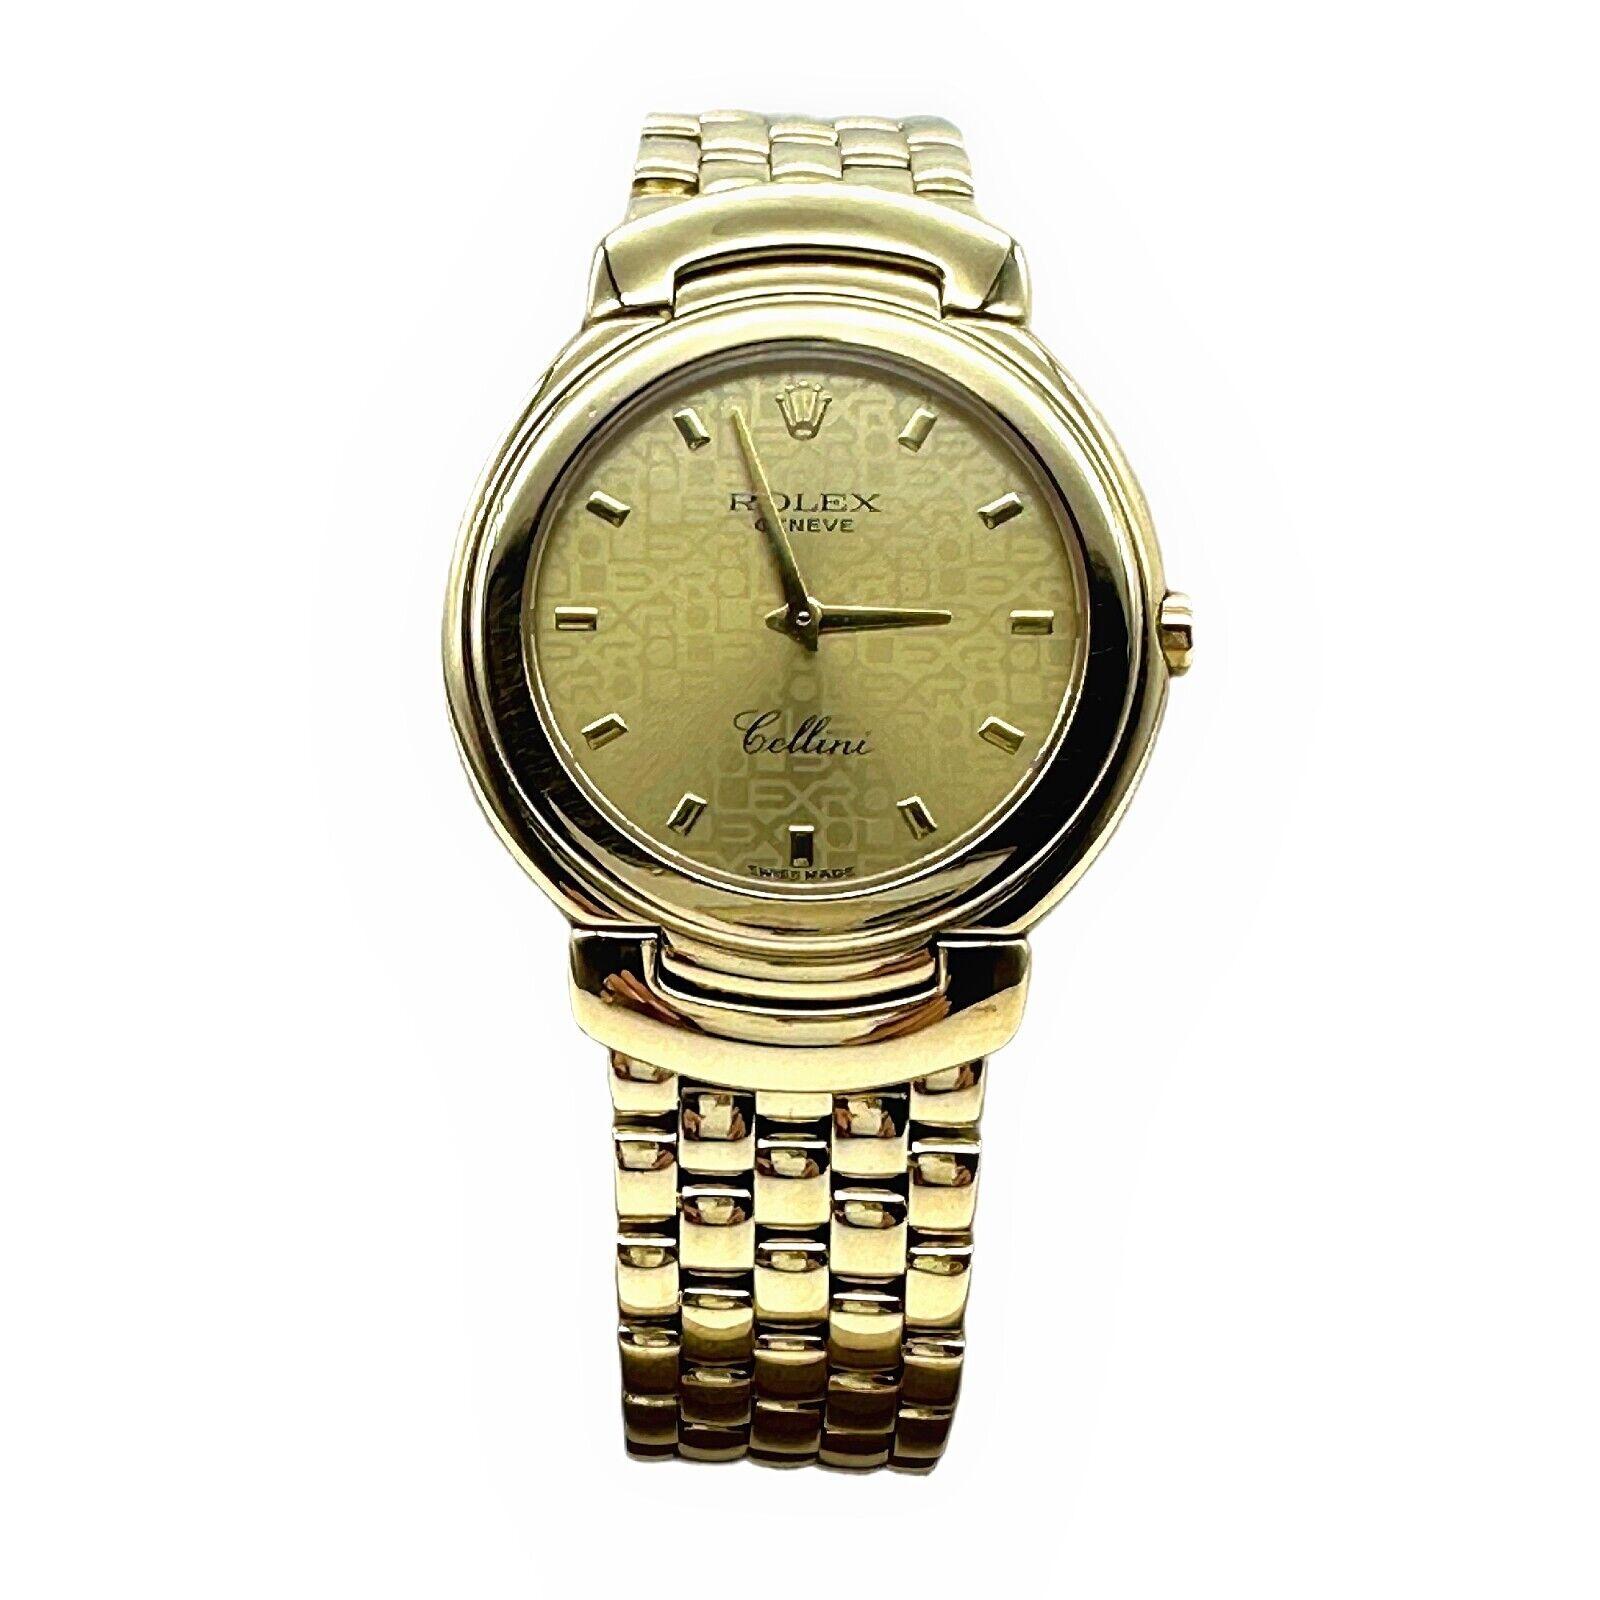 Rolex 6622 Cellini Jubilee Dial 18K Yellow Gold 33mm In Excellent Condition For Sale In San Diego, CA